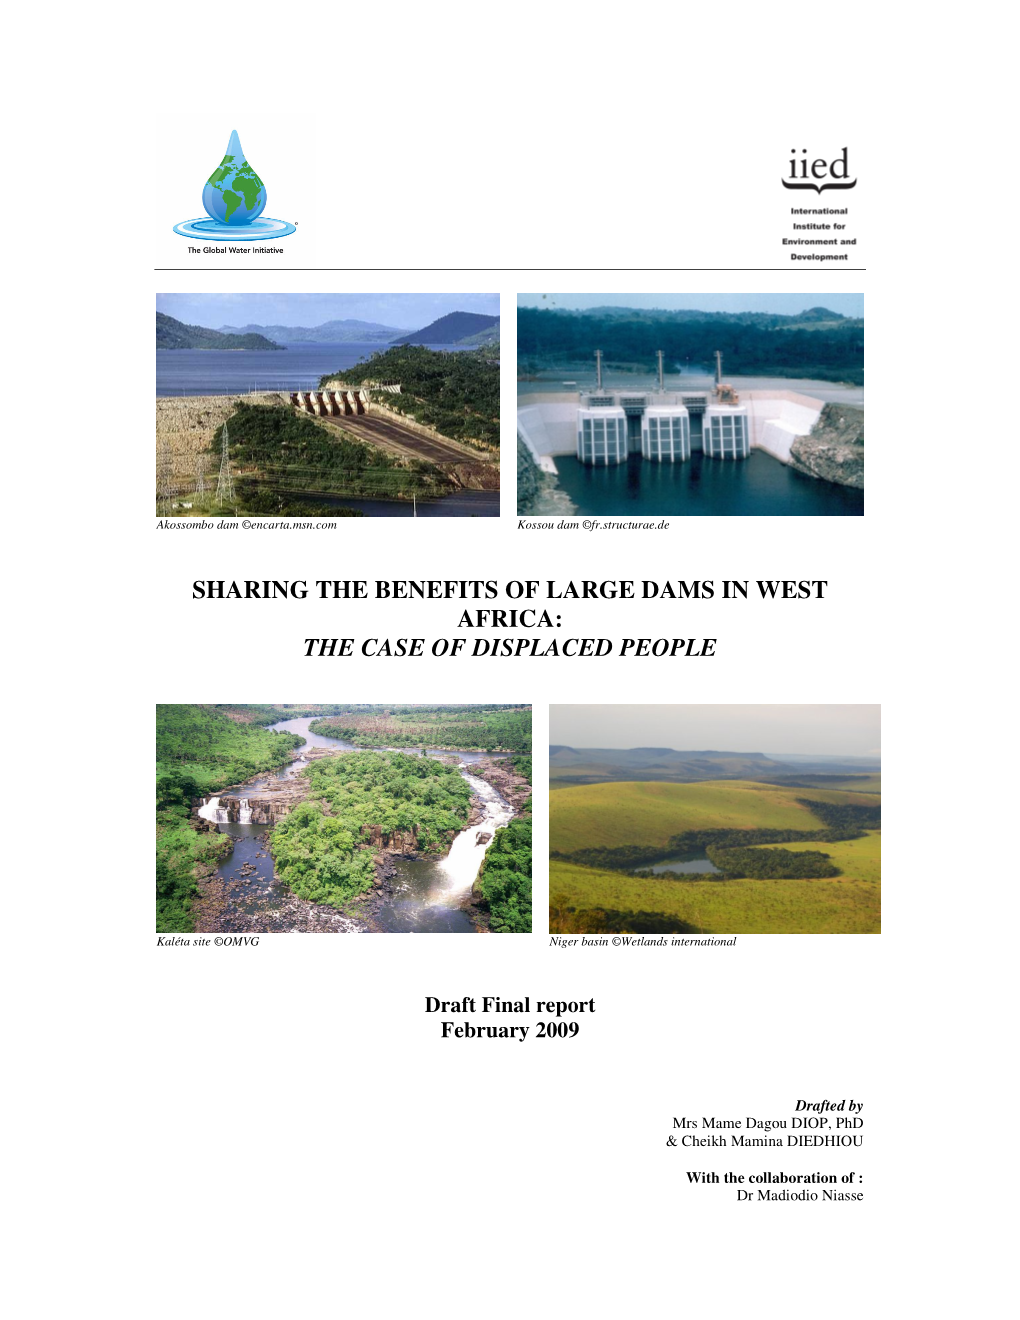 Sharing the Benefits of Large Dams in West Africa: the Case of Displaced People